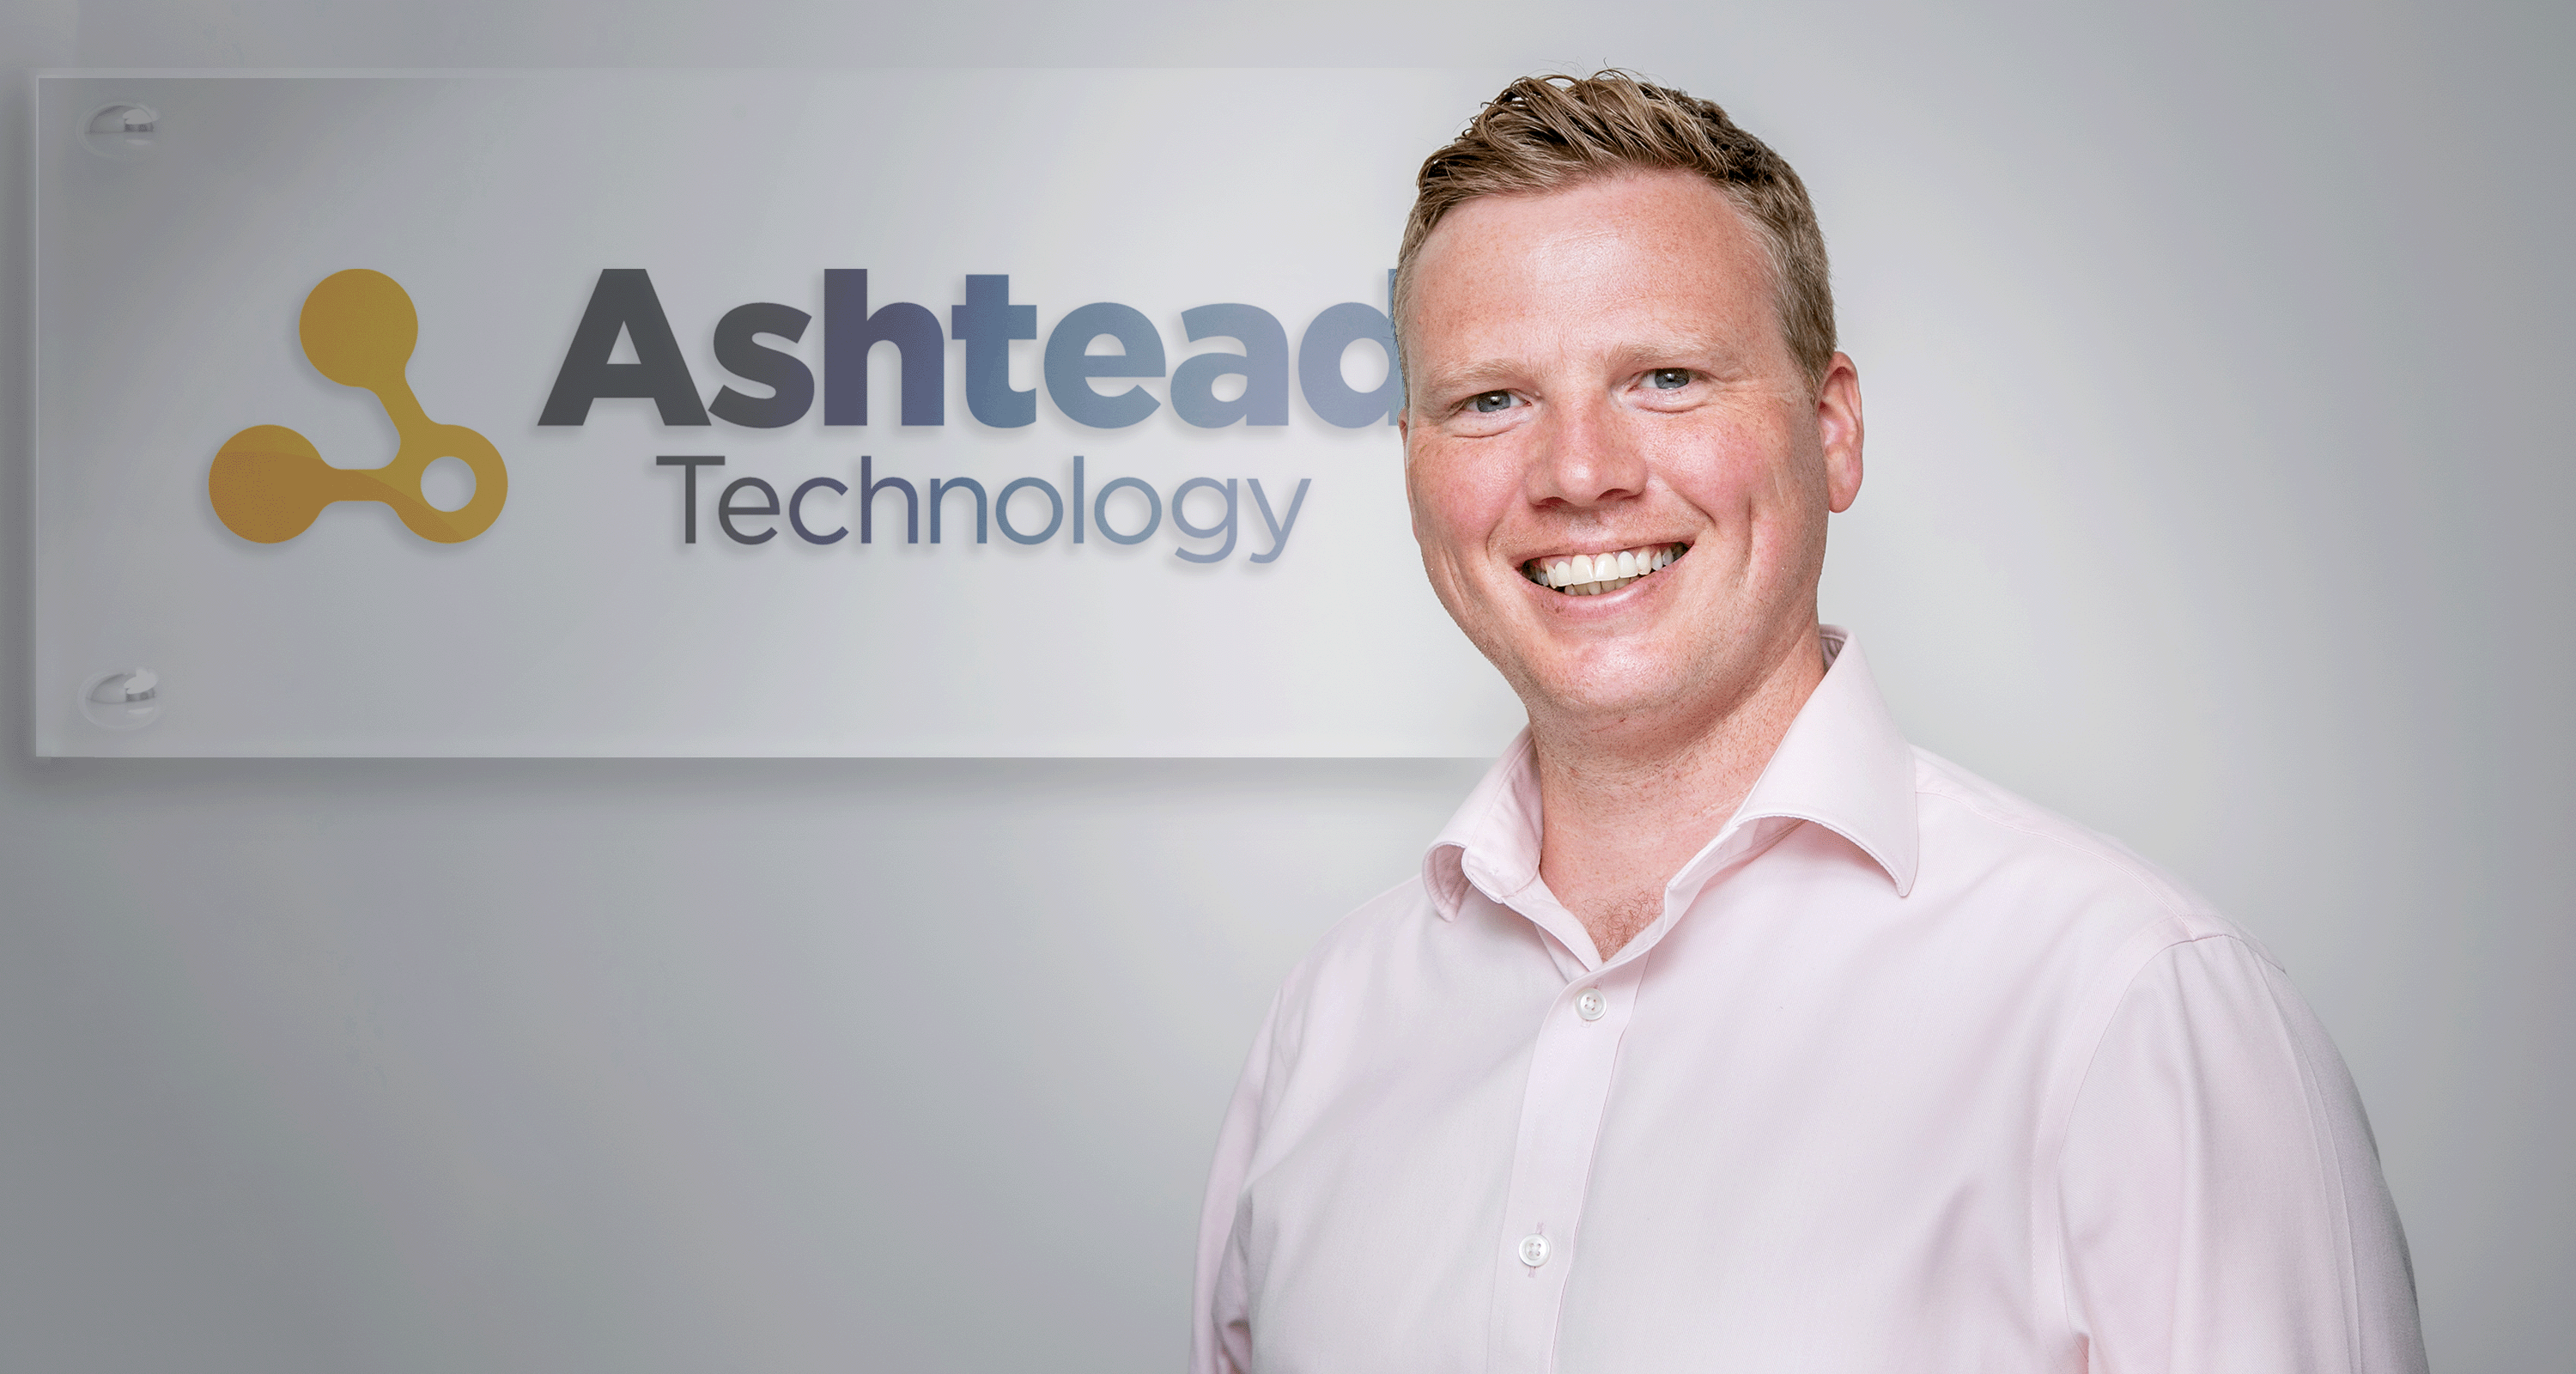 MEMBER NEWS: Ashtead Technology appoints new Regional General Manager for the Middle East